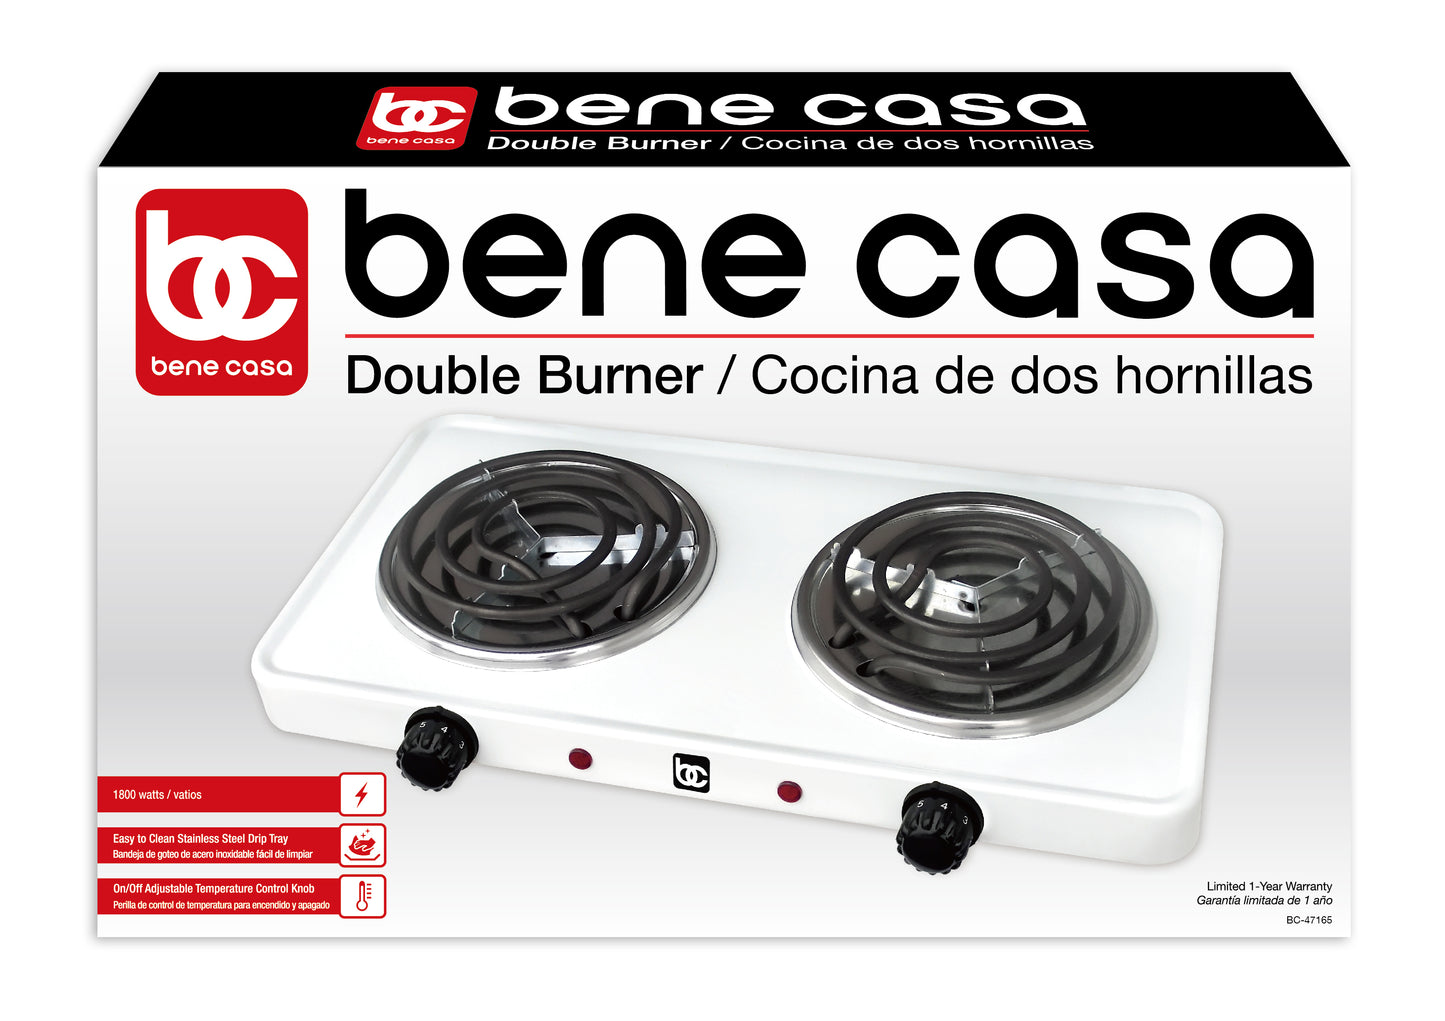 Double Electric Burner Cooktop with Adjustable Temperature - Model